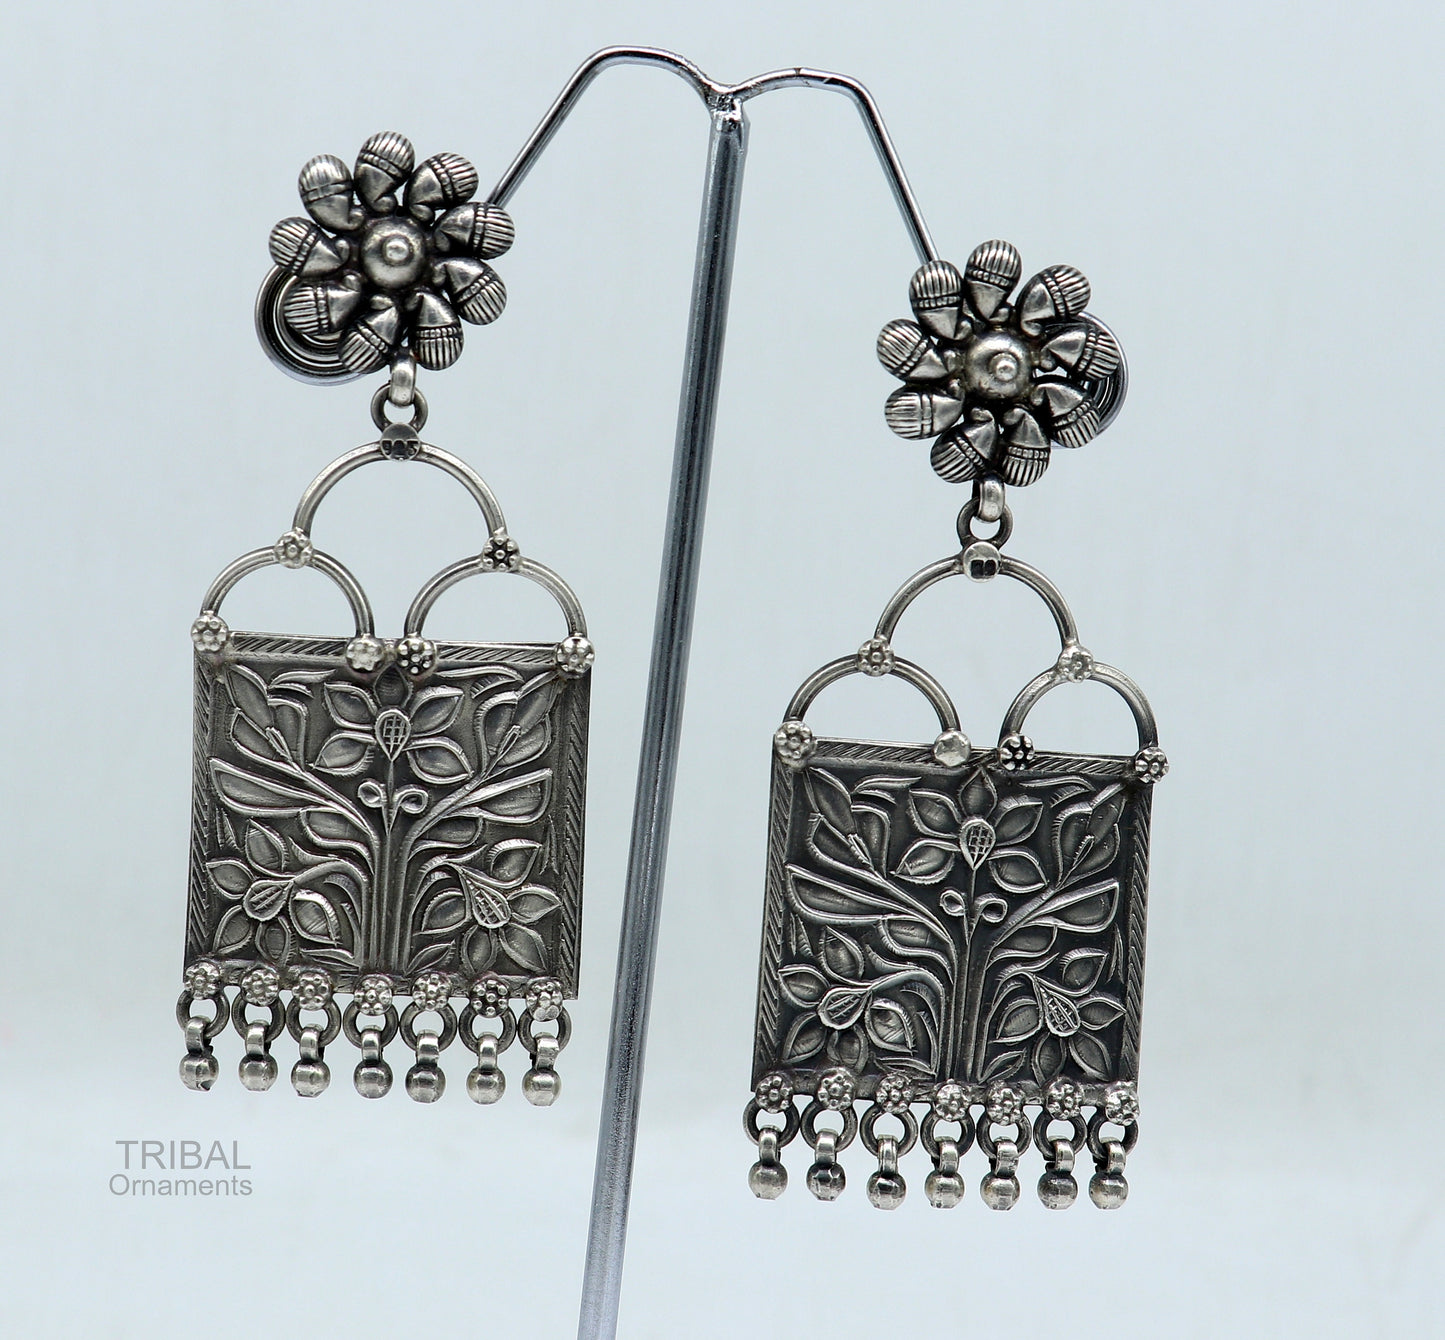 925 sterling silver handmade vintage antique floral design excellent customized stud earring gorgeous hanging drops tribal earrings s961 - TRIBAL ORNAMENTS